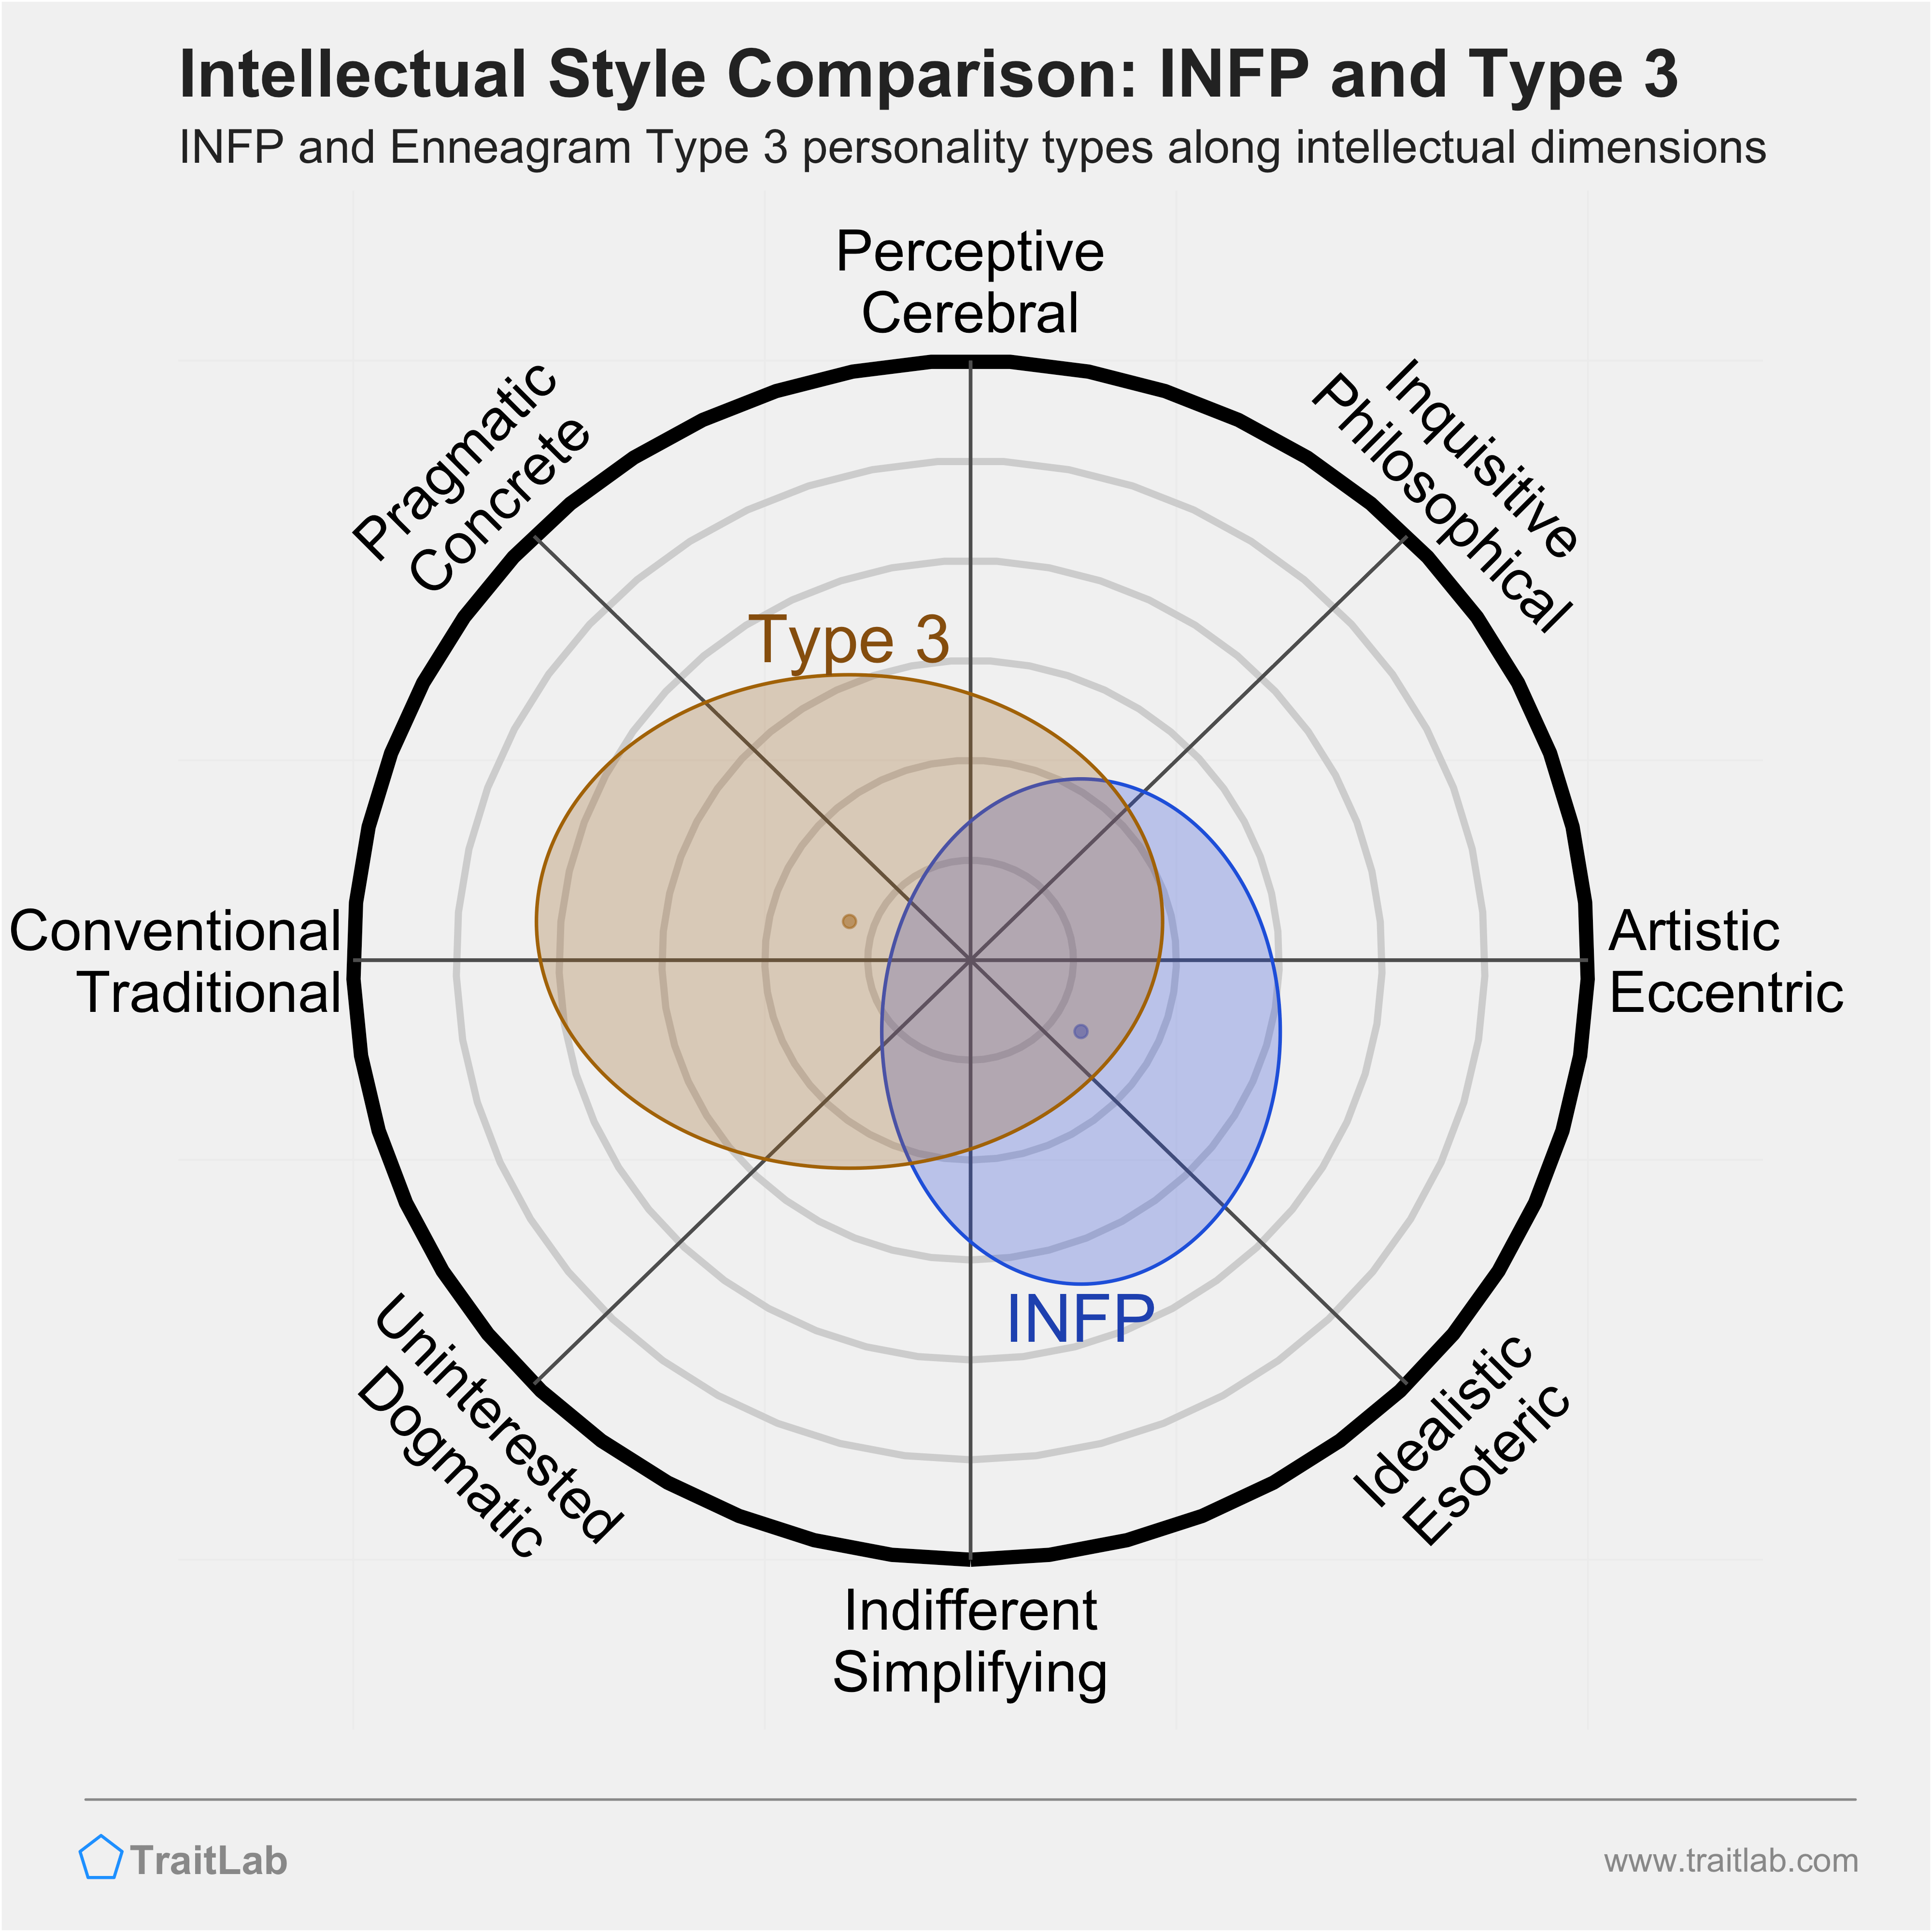 INFP and Type 3 comparison across intellectual dimensions